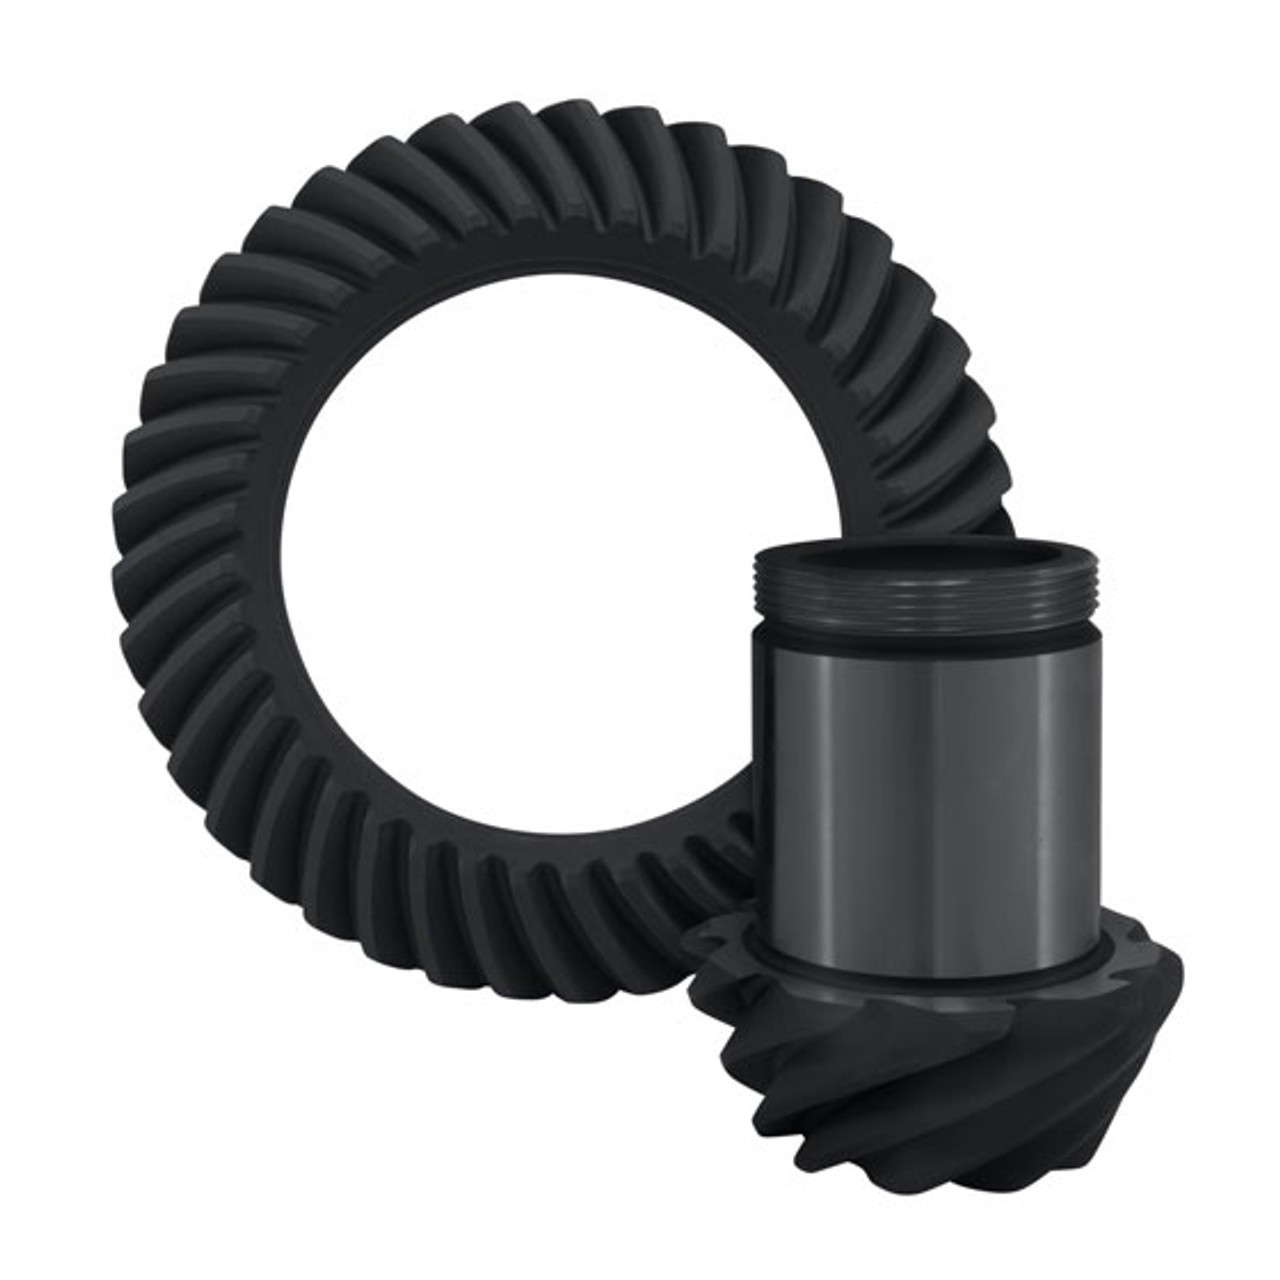 High performance Yukon Ring & Pinion gear set for GM C5 (Corvette) in a 4.11 ratio